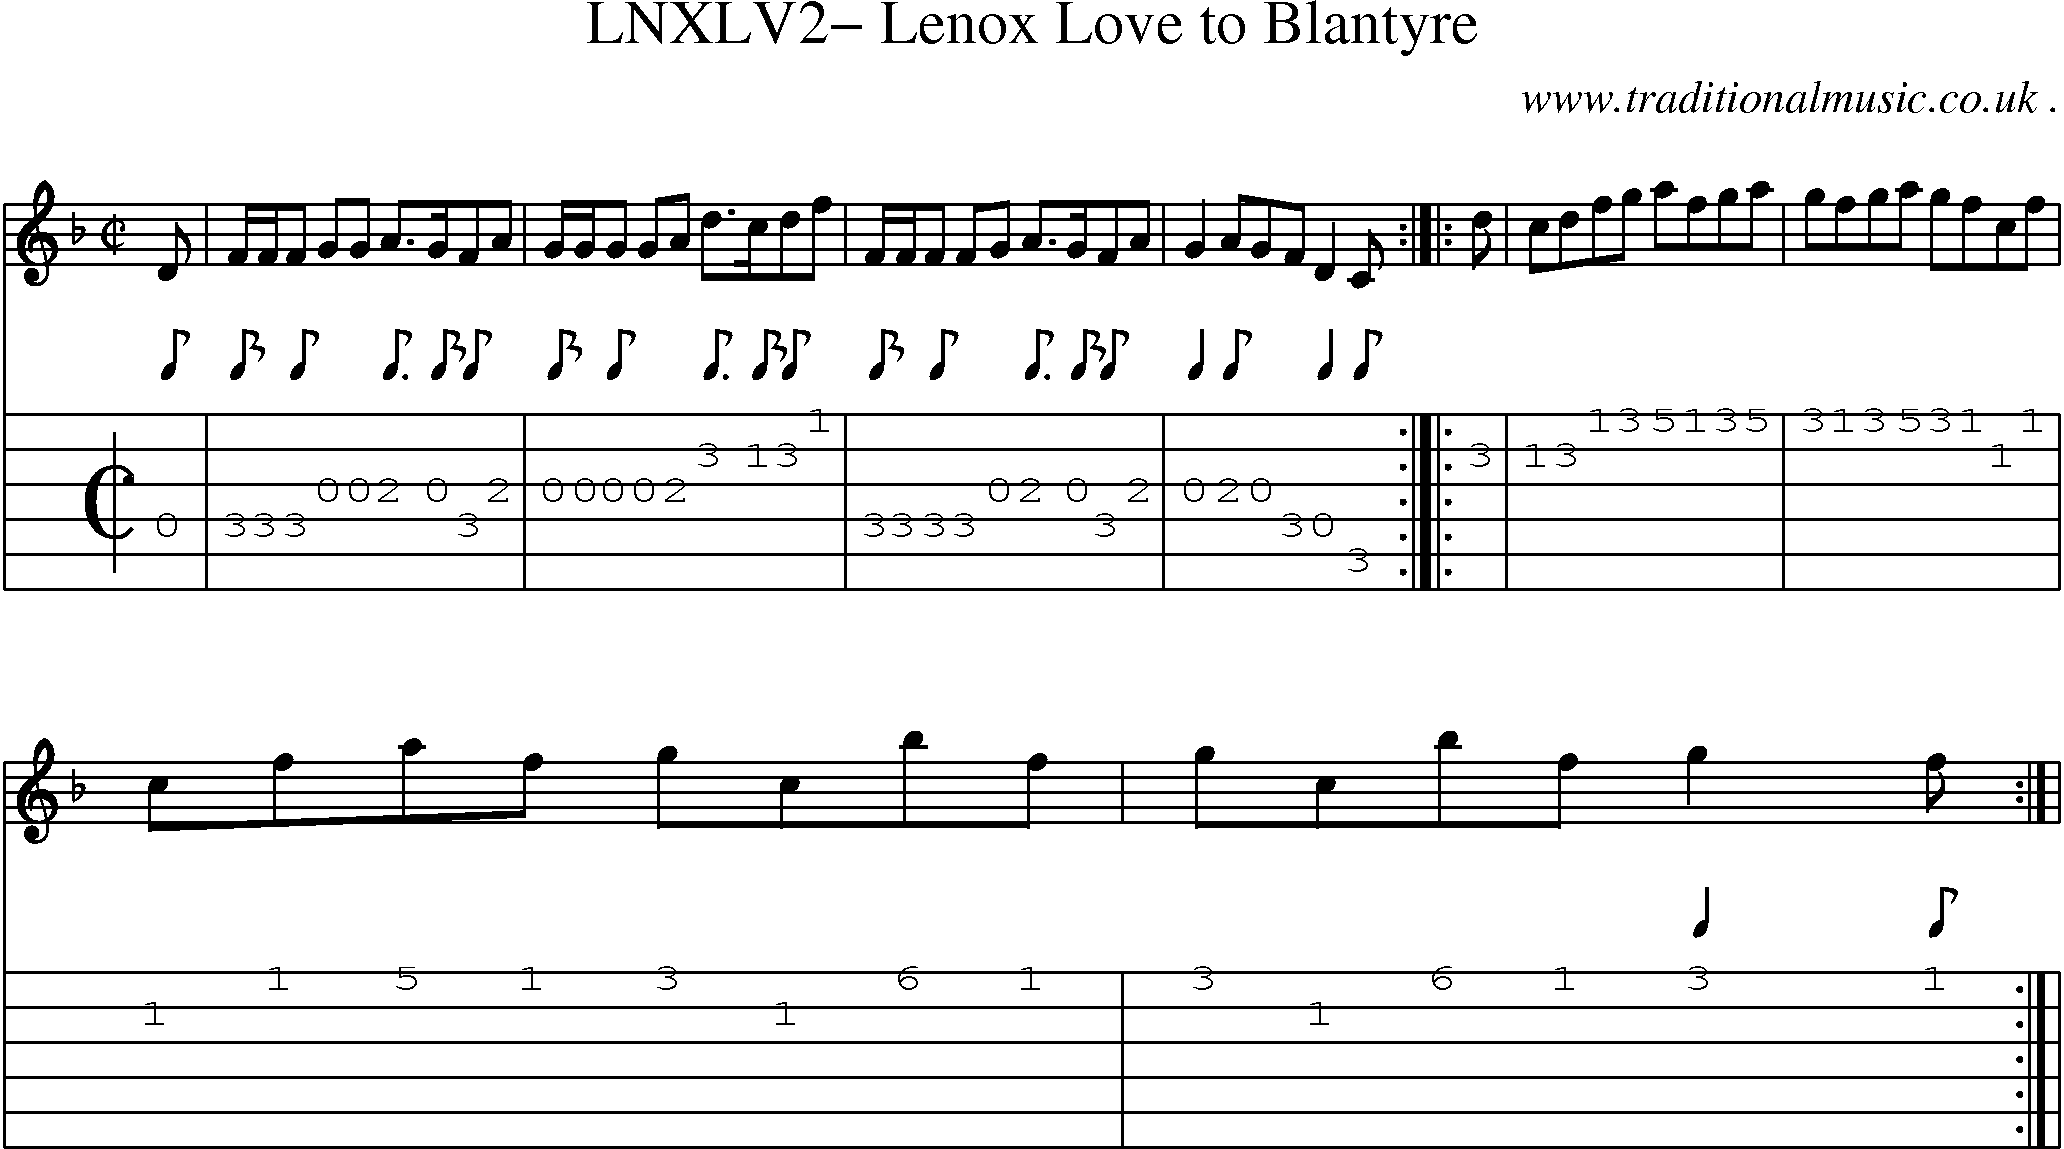 Sheet-Music and Guitar Tabs for Lnxlv2 Lenox Love To Blantyre